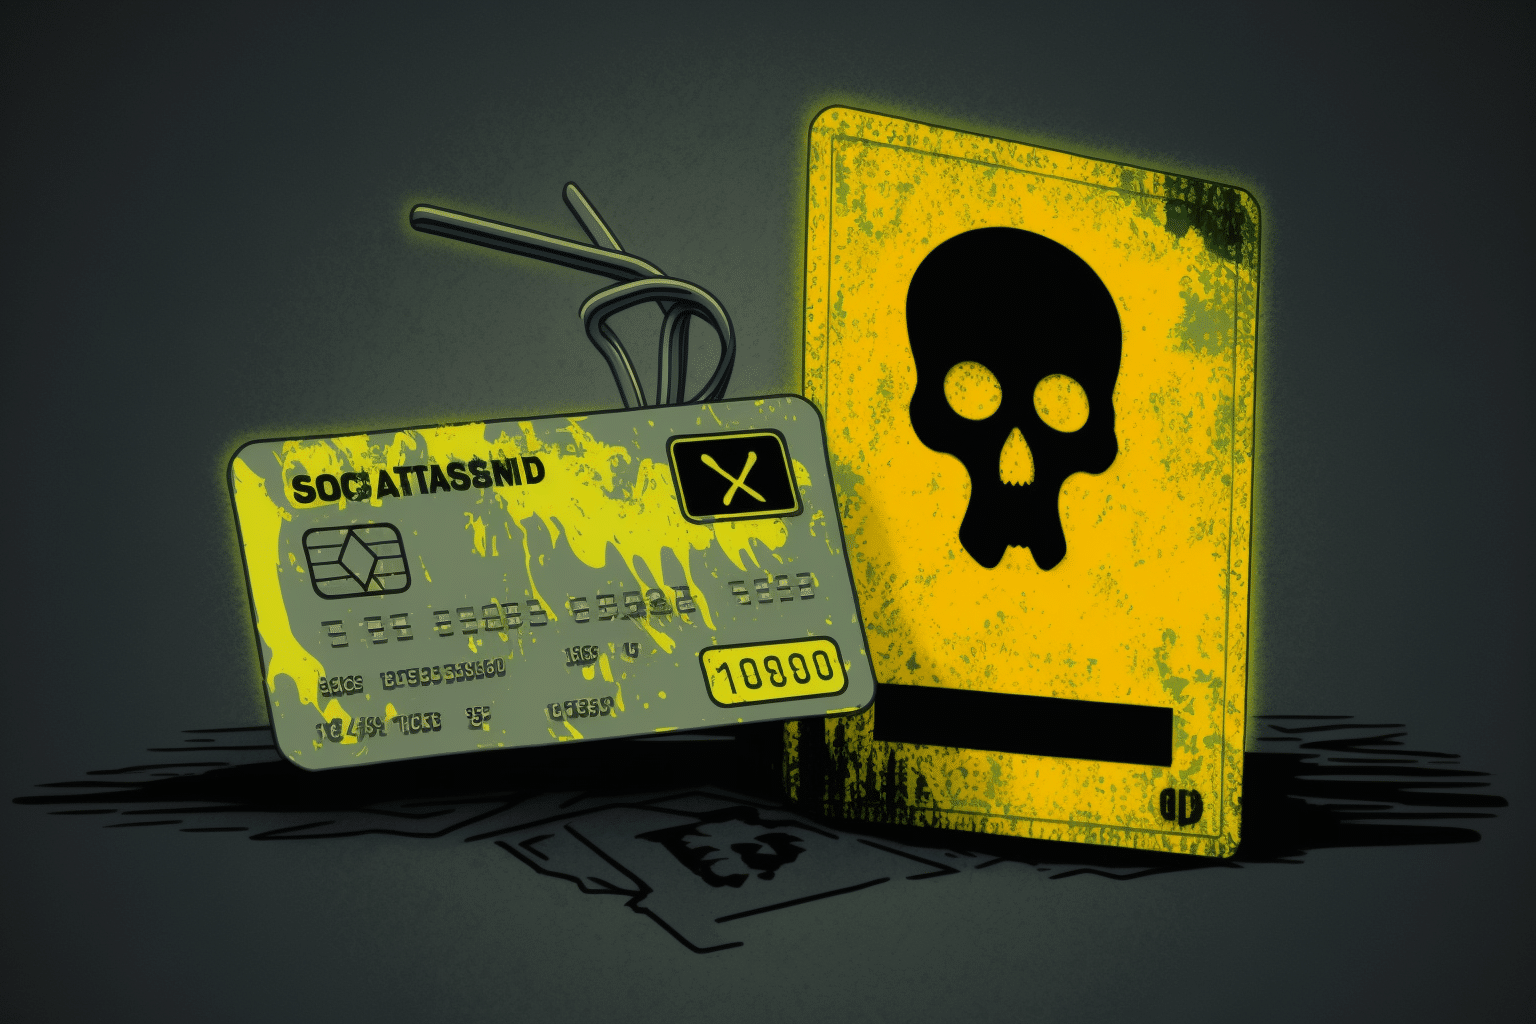 An AI generated image of a green credit card with yellow splotches on it next to a yellow sign with a black skull on it.